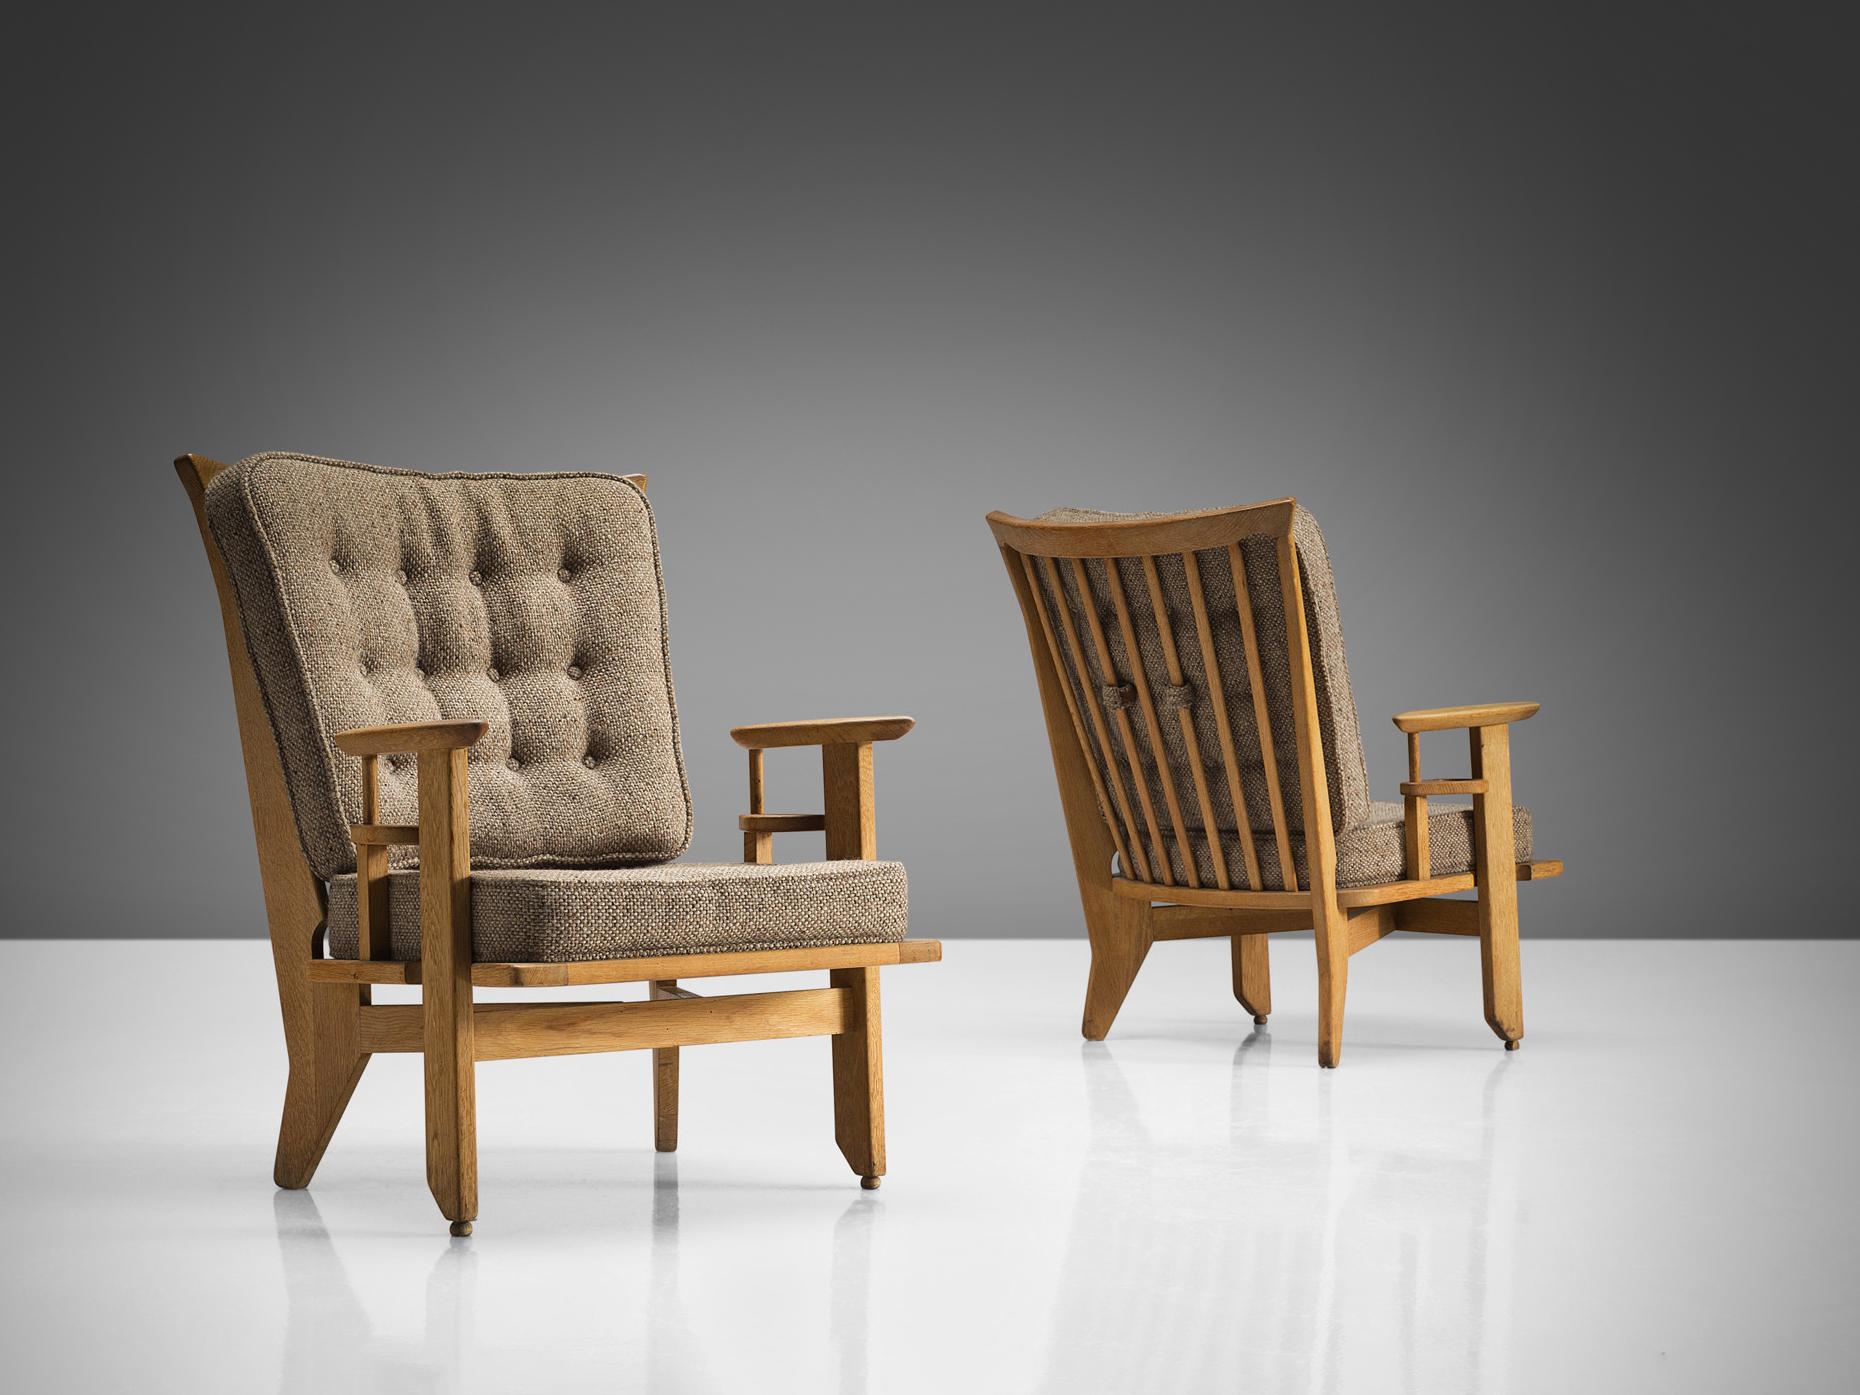 Guillerme et Chambron, pair of lounge chairs, oak, beige woolen upholstery, France, 1965. 

Sculpted Guillerme et Chambron lounge chairs in solid oak with the characteristic spindled back and tapered forms of the legs. The sculptural frame with